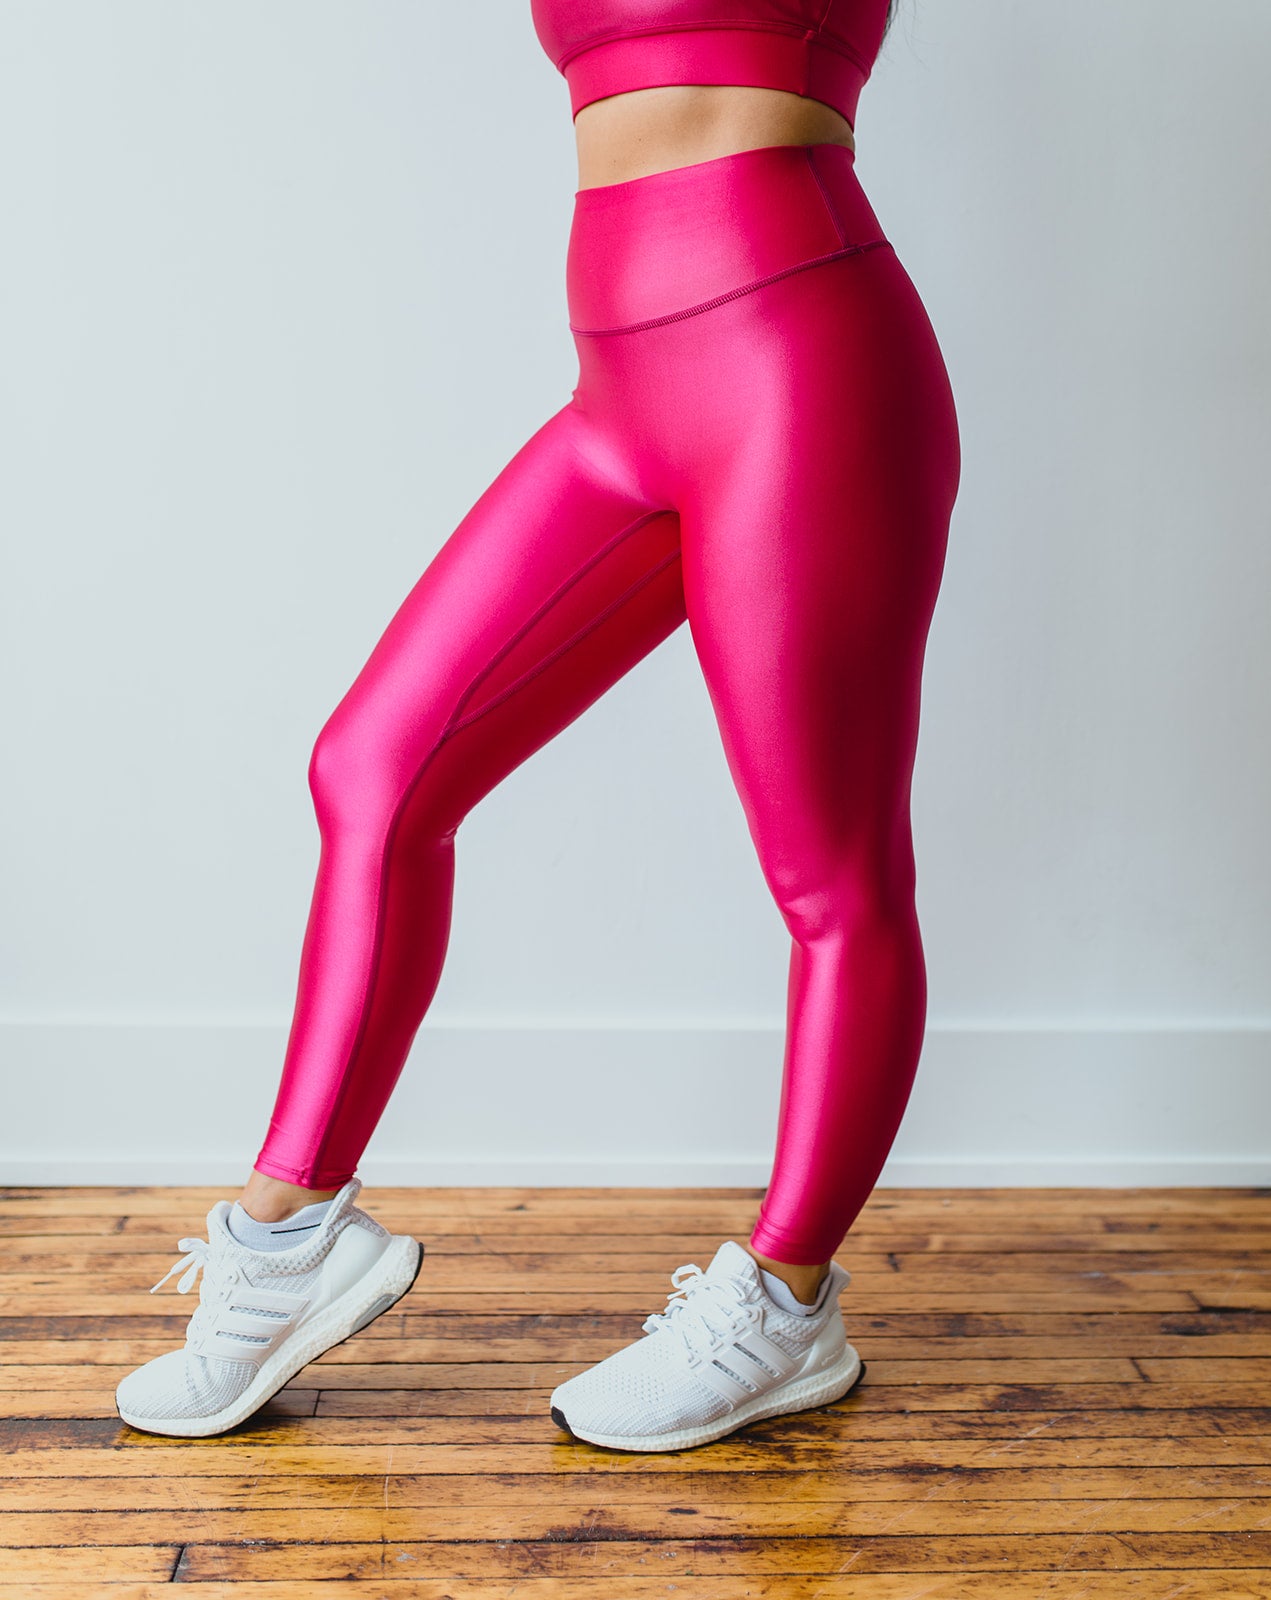 Neon Pink Tights